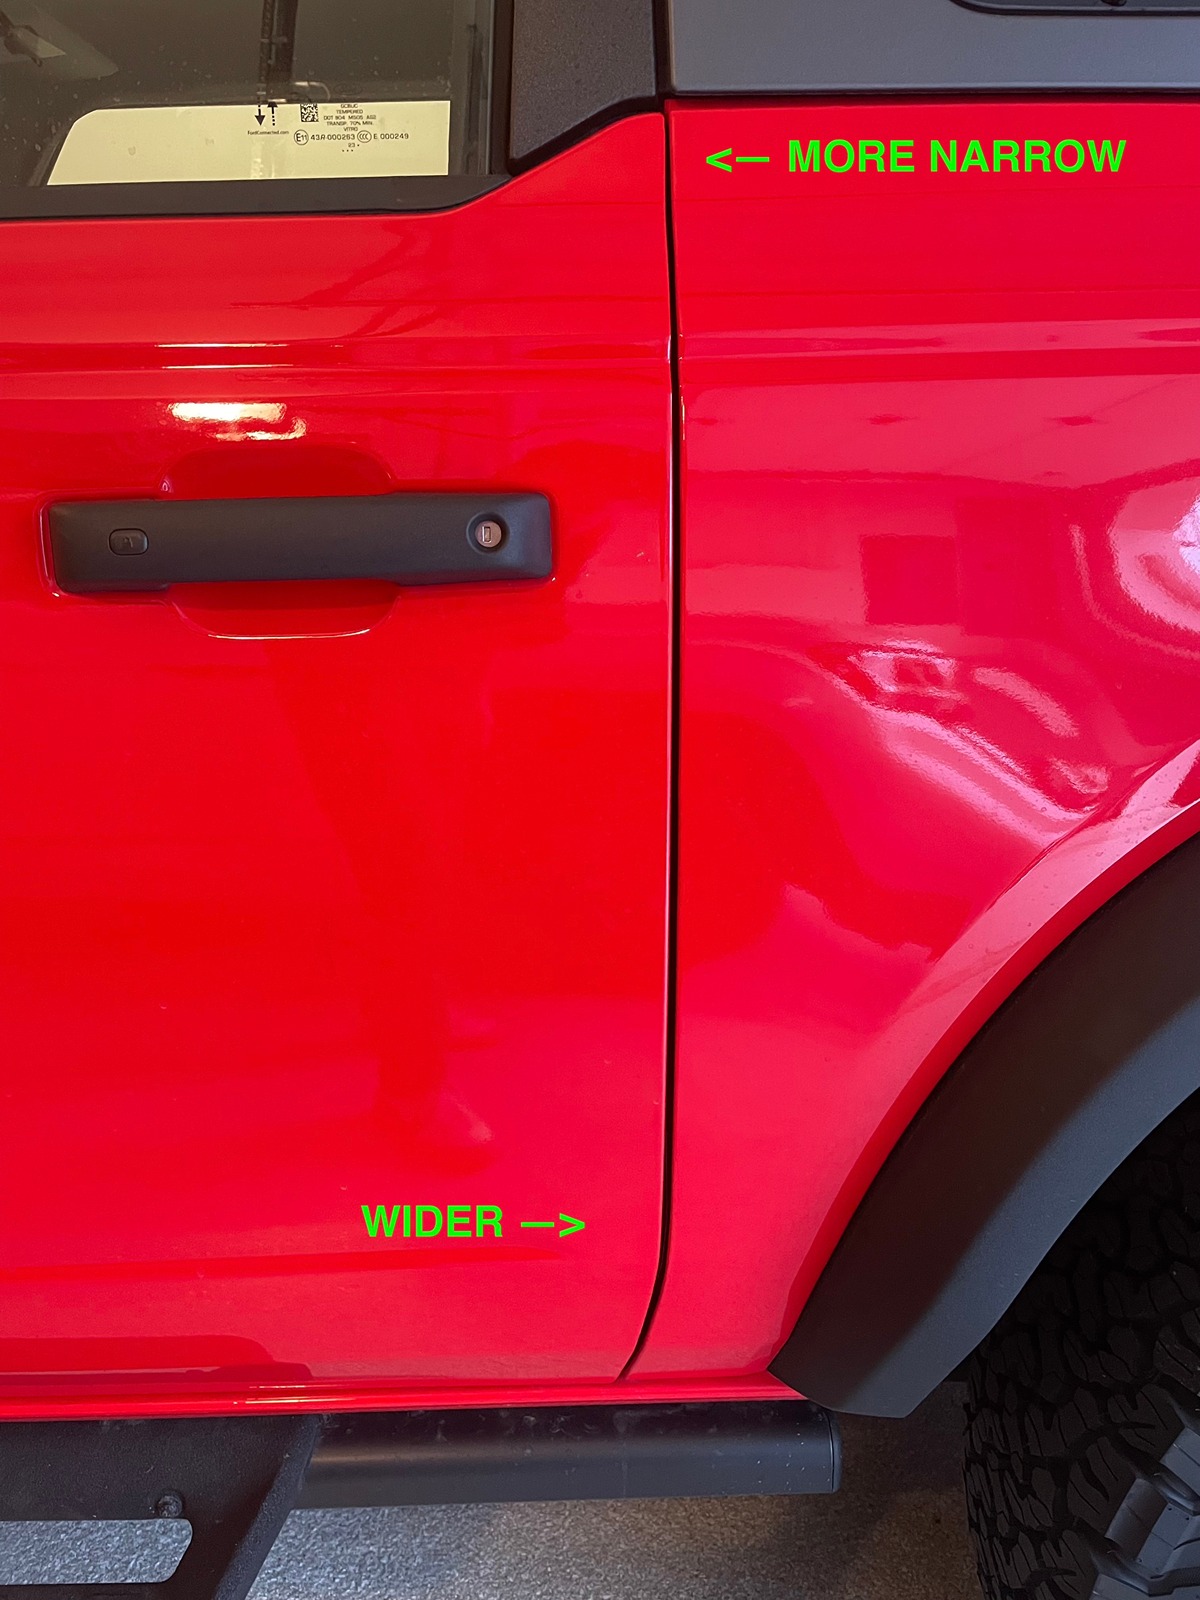 Ford Bronco Proper Door Panel Alignment Issues? rear